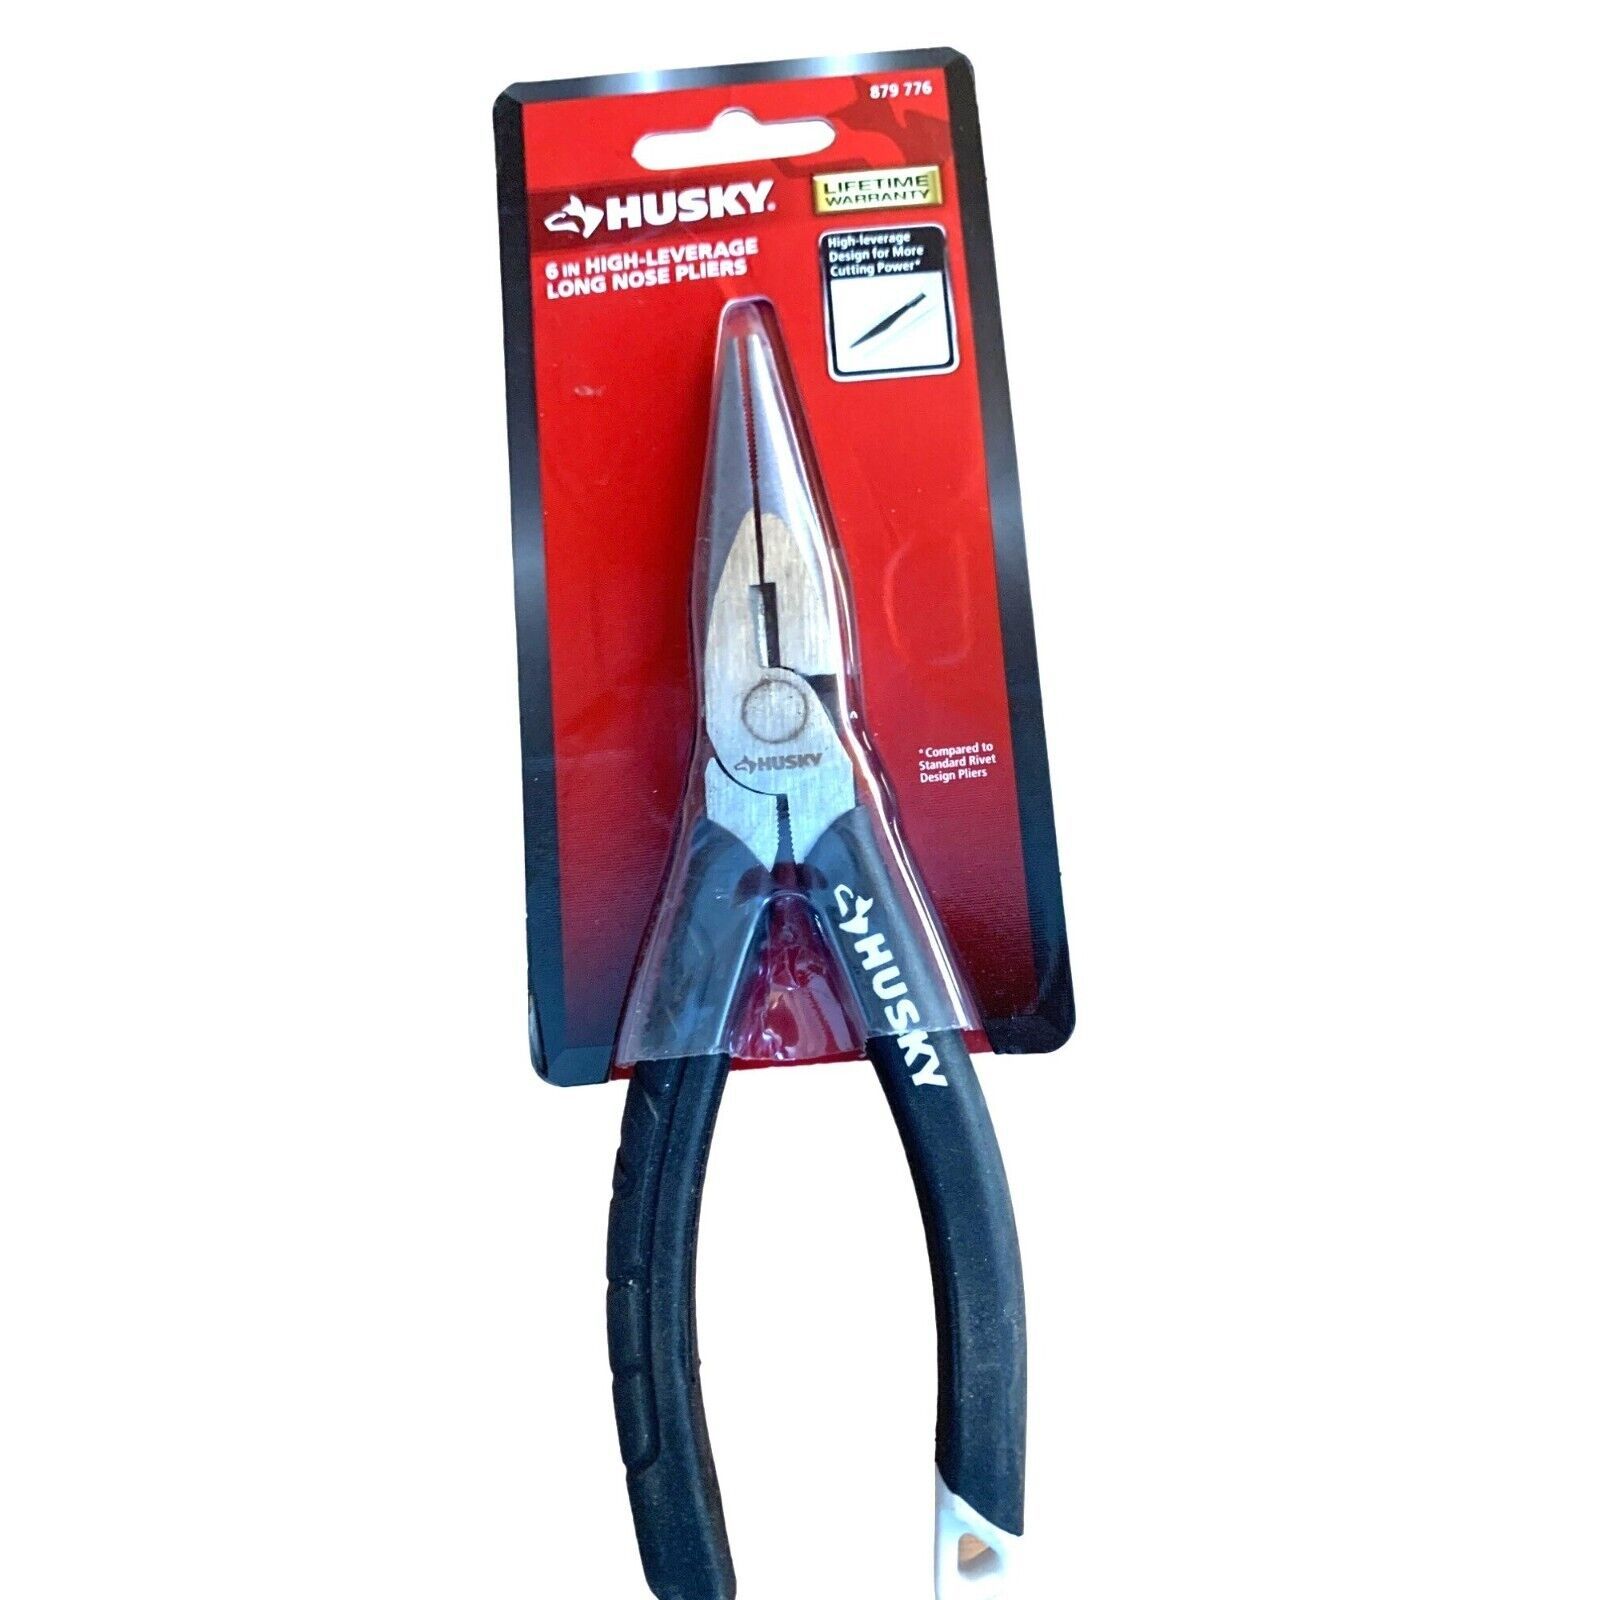 Husky 6in High Leverage Long Nose Pliers 879 776 - $12.99